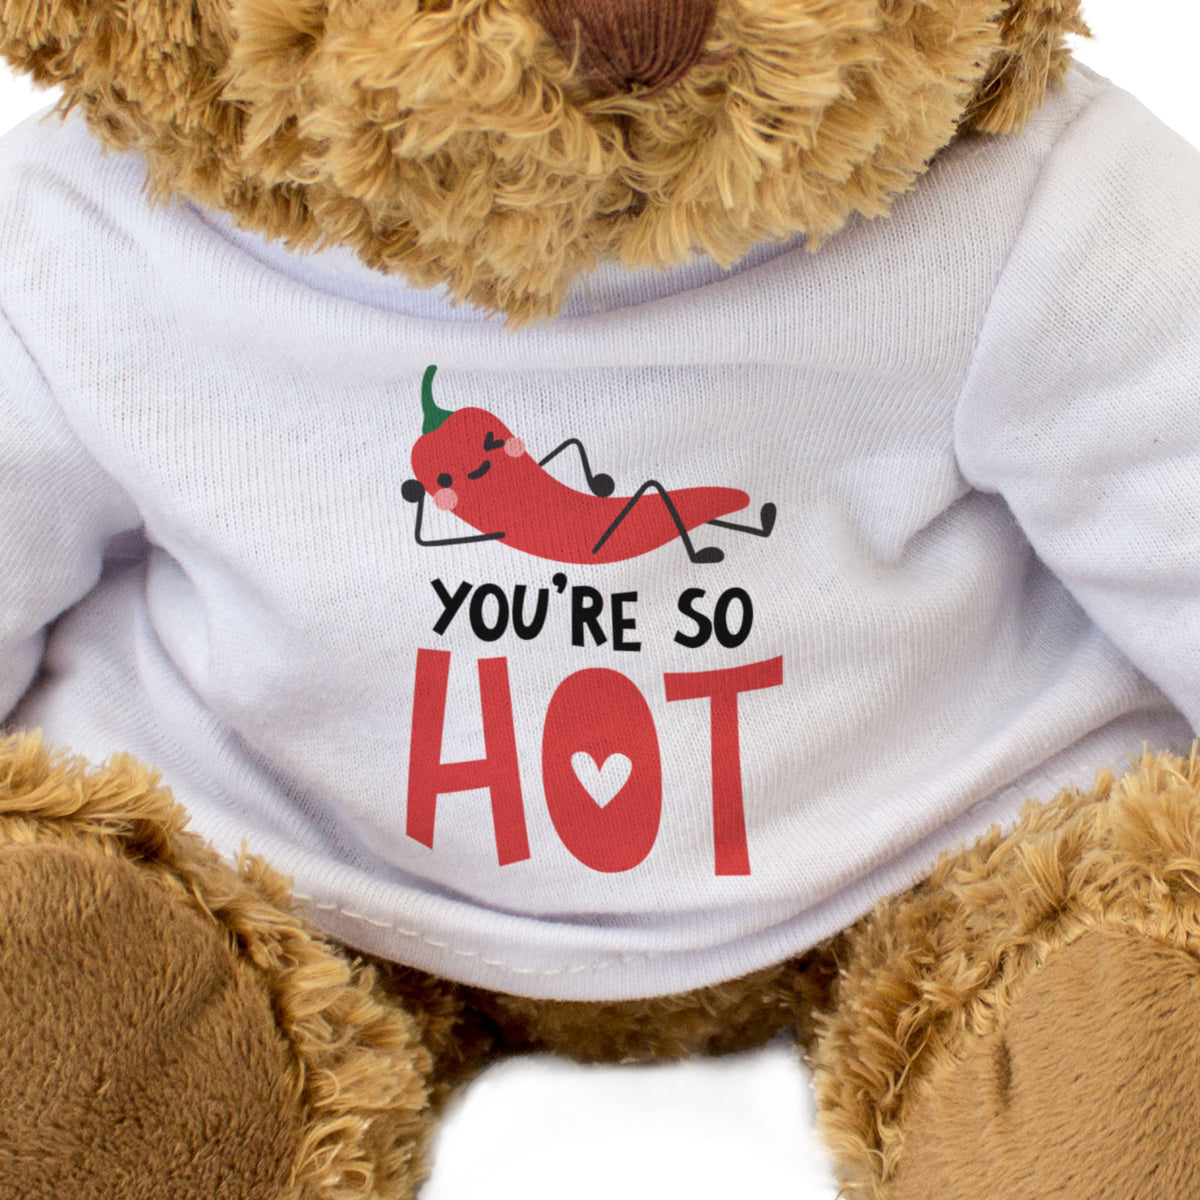 YOU'RE SO HOT (Chili) - Teddy Bear - Gift Present